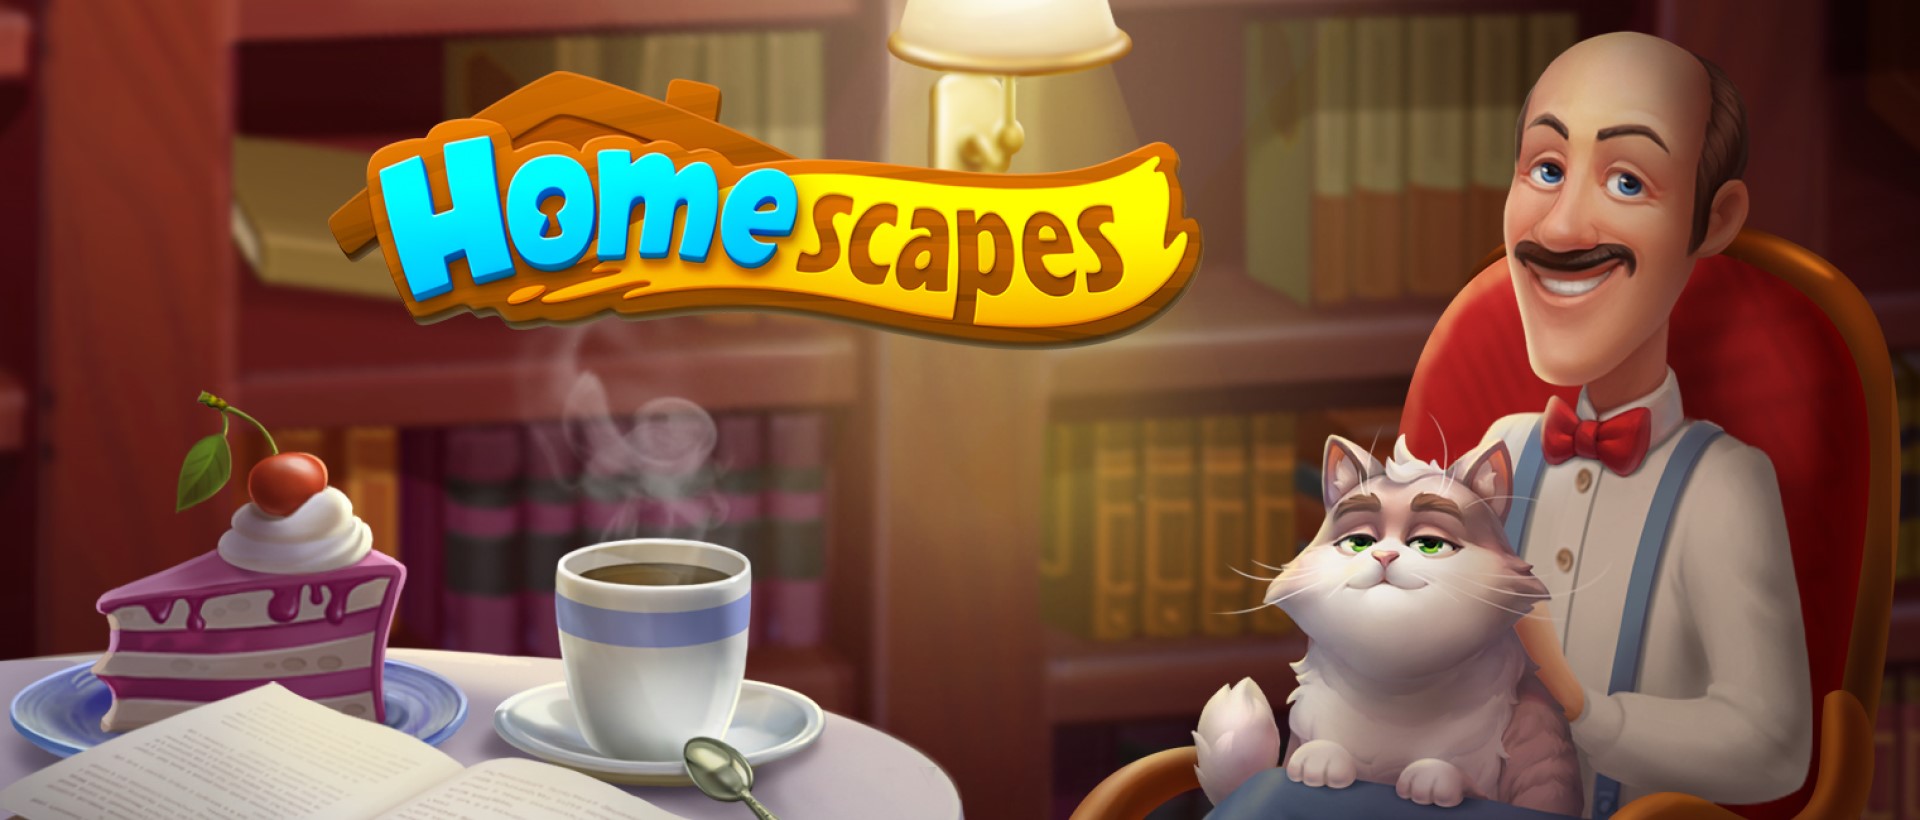 homescapes pc game download